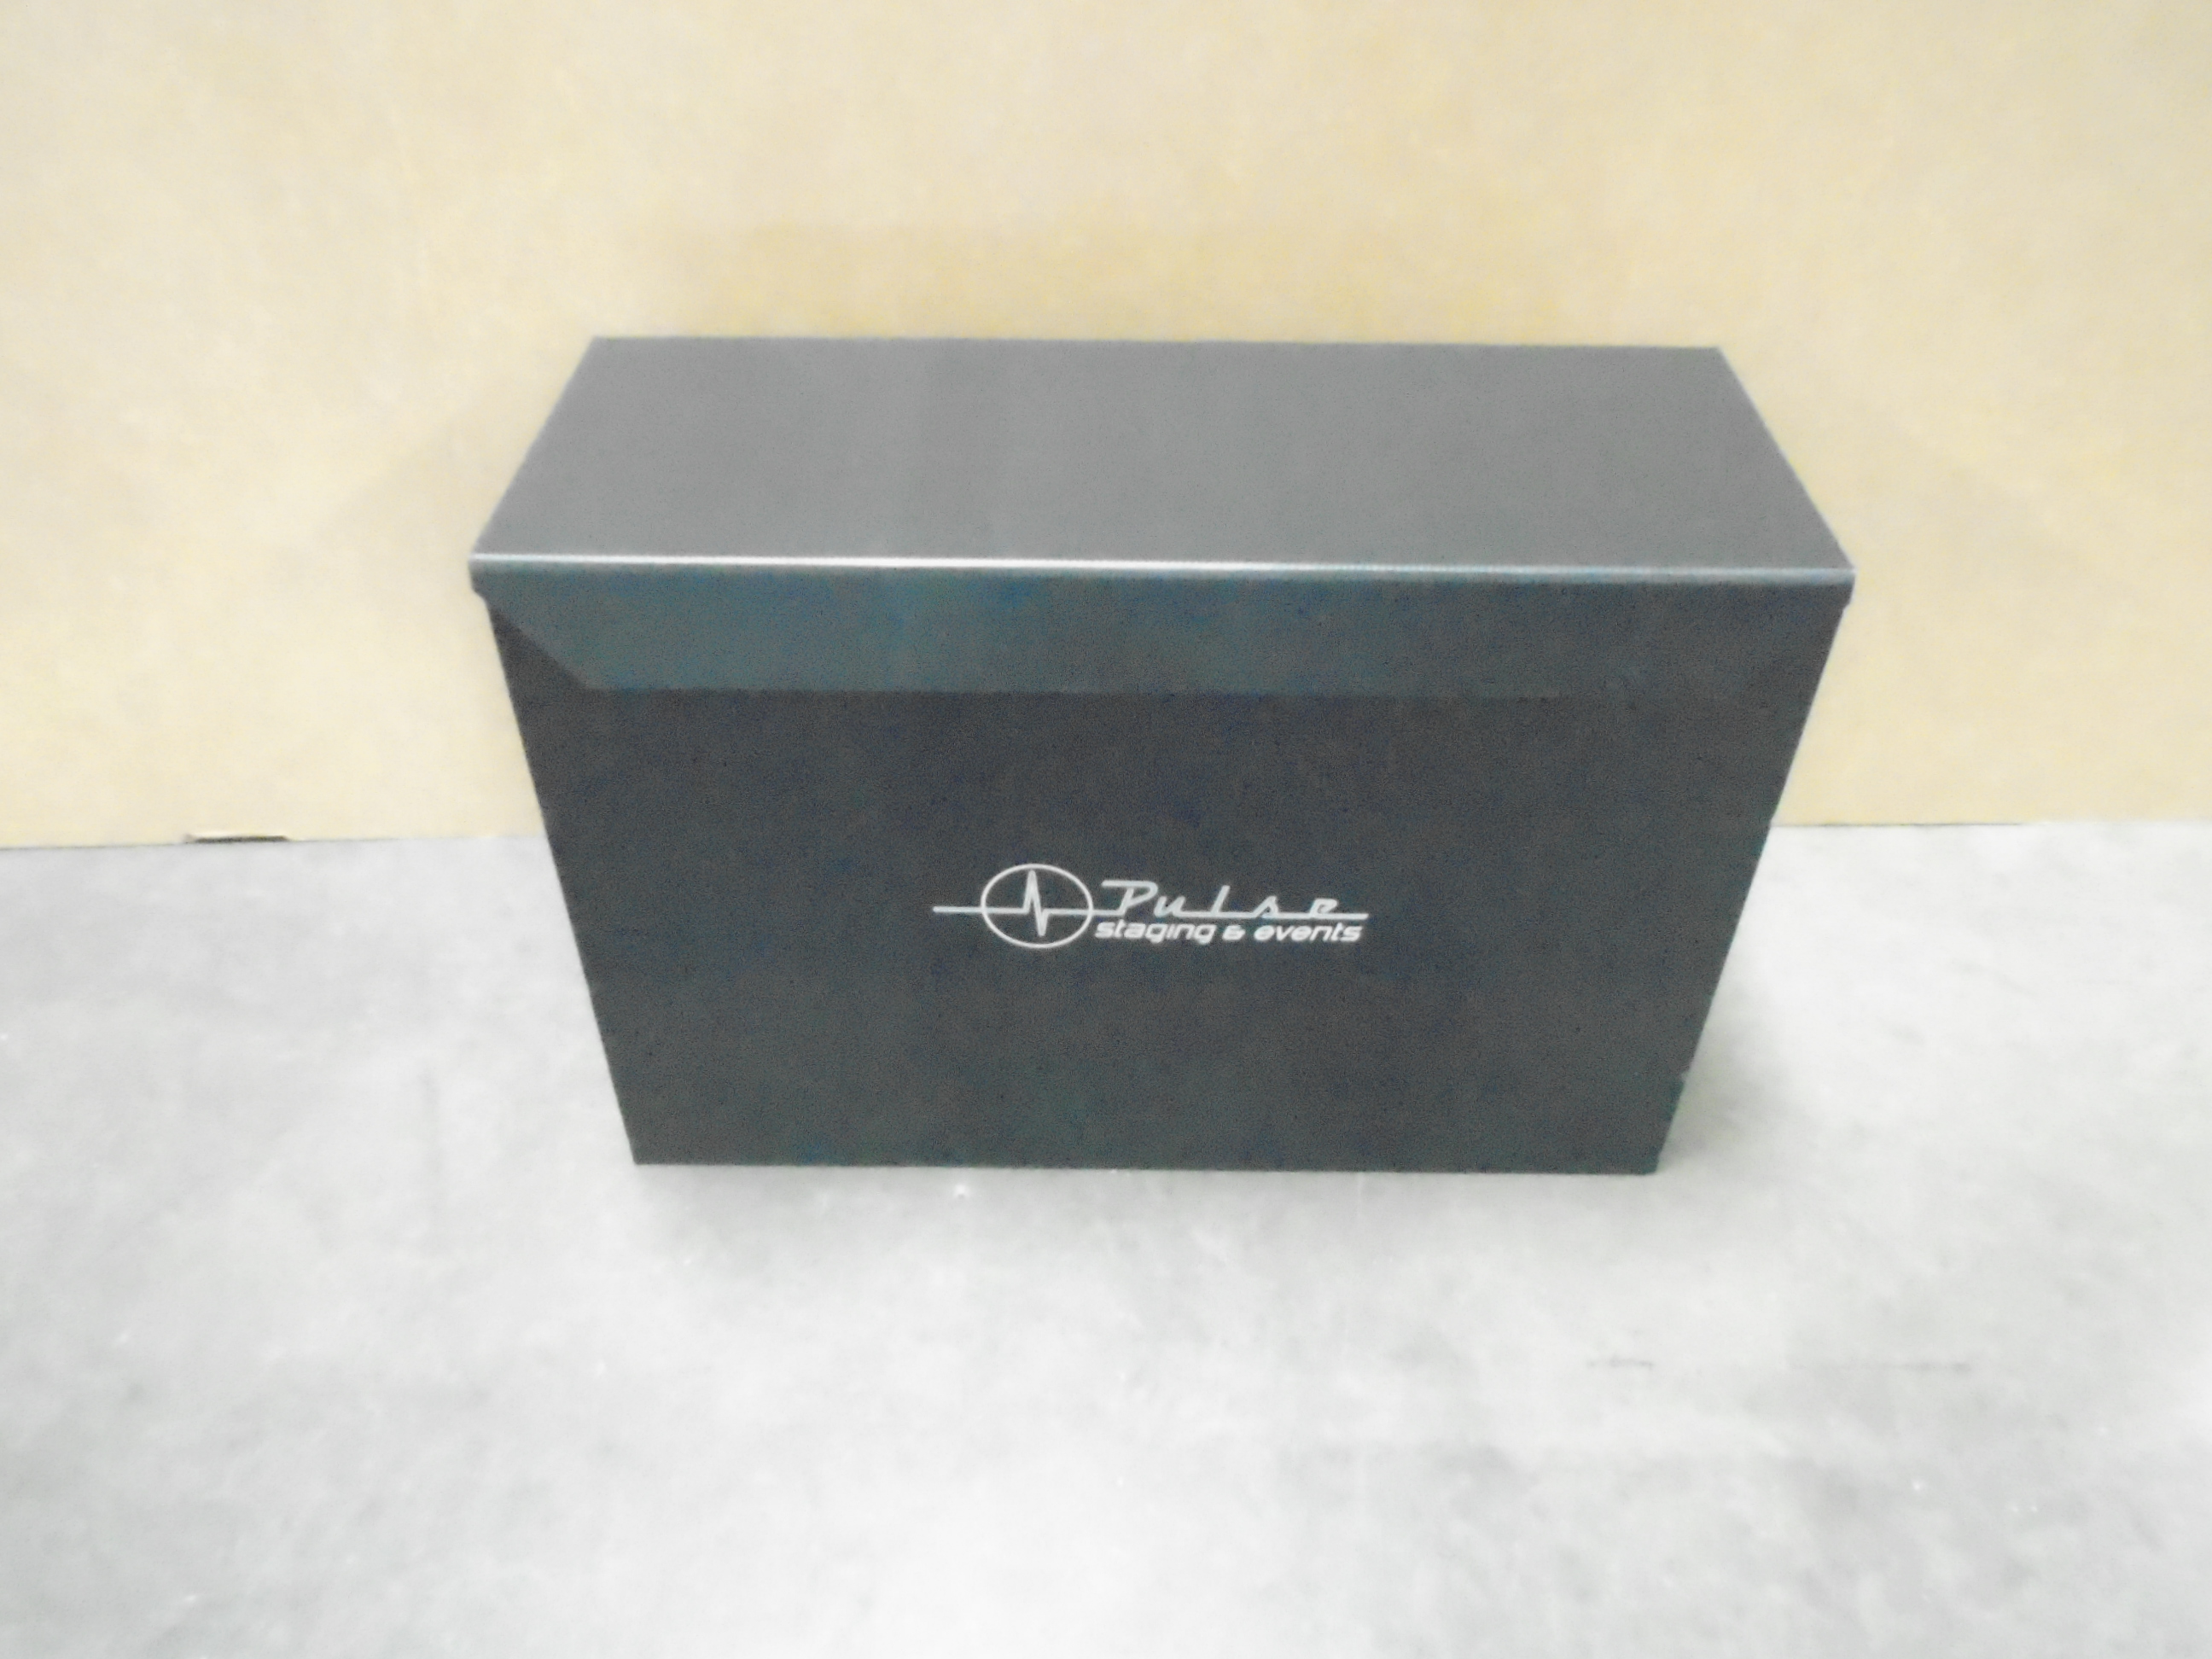 Print # 9260 - Custom Heavy Duty Corrugated Box for Dell D3218HN 32'' Monitor with Stand Attached By Nelson Case Corp